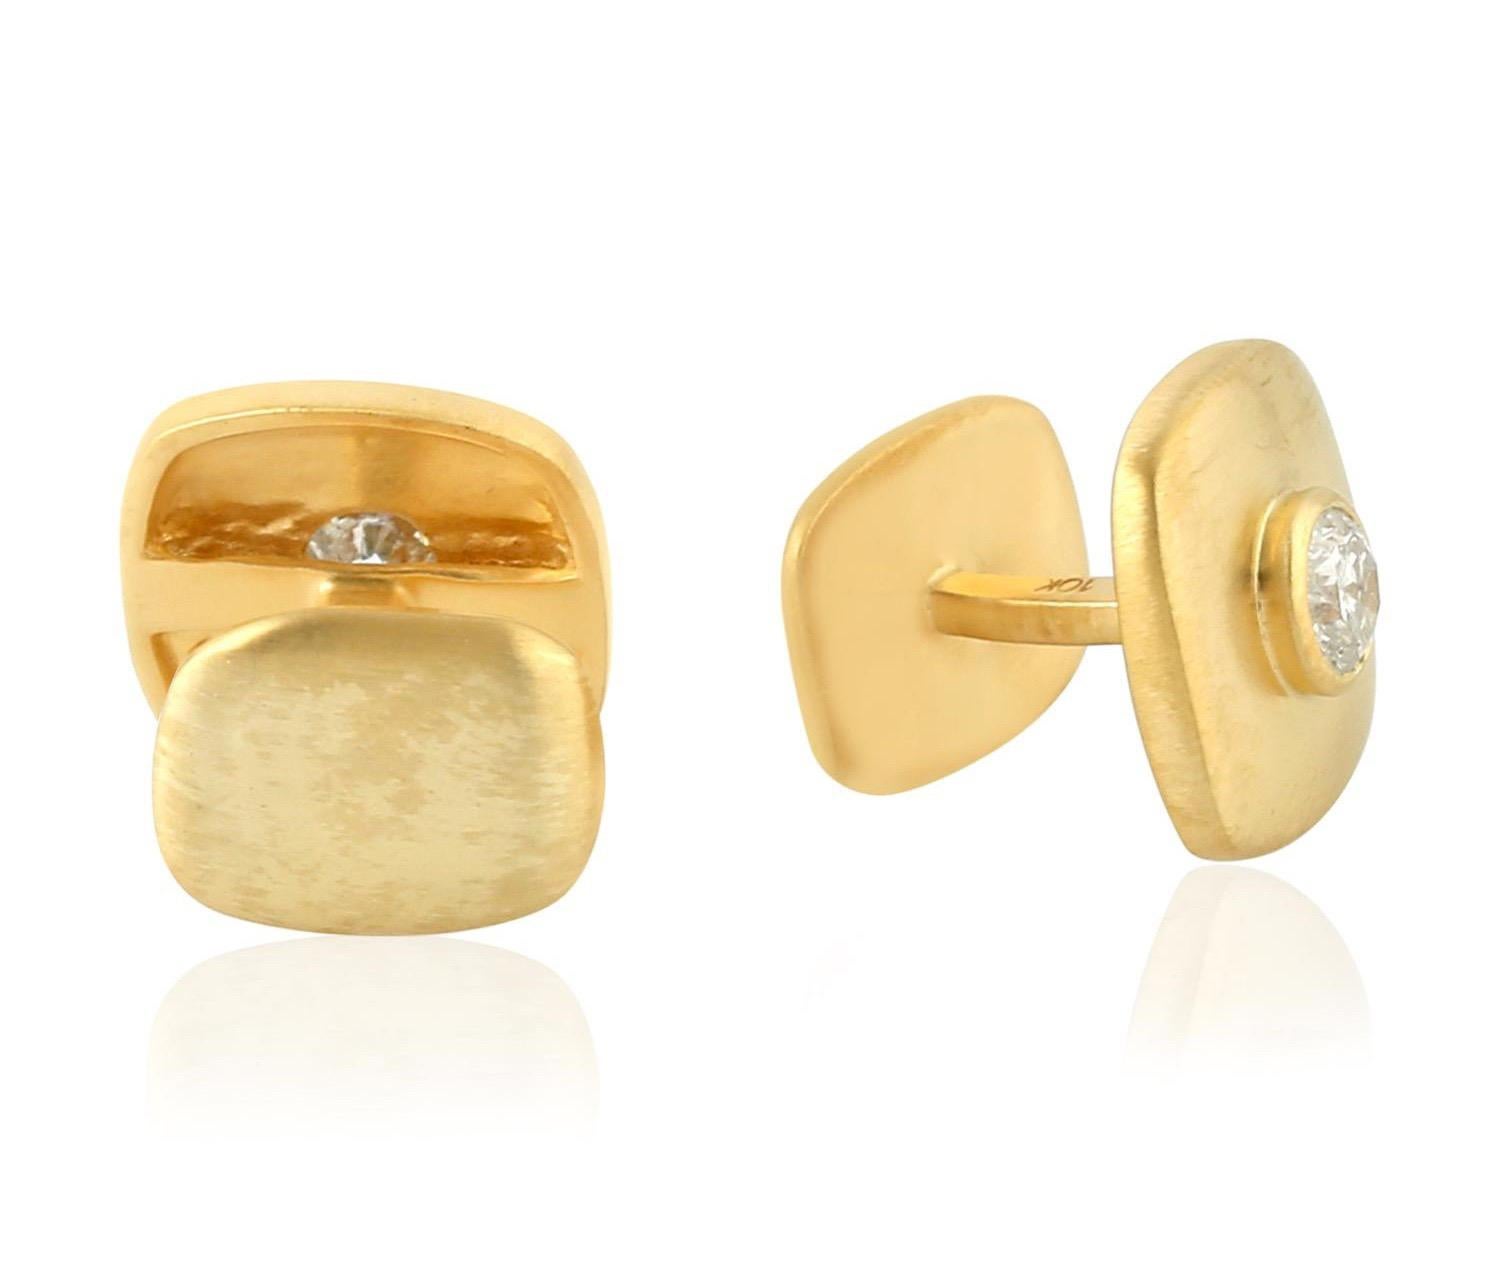 Cast from 10-karat gold, these cuff links are hand set with .57 carats of diamonds in center with matte gold finish.

FOLLOW  MEGHNA JEWELS storefront to view the latest collection & exclusive pieces.  Meghna Jewels is proudly rated as a Top Seller